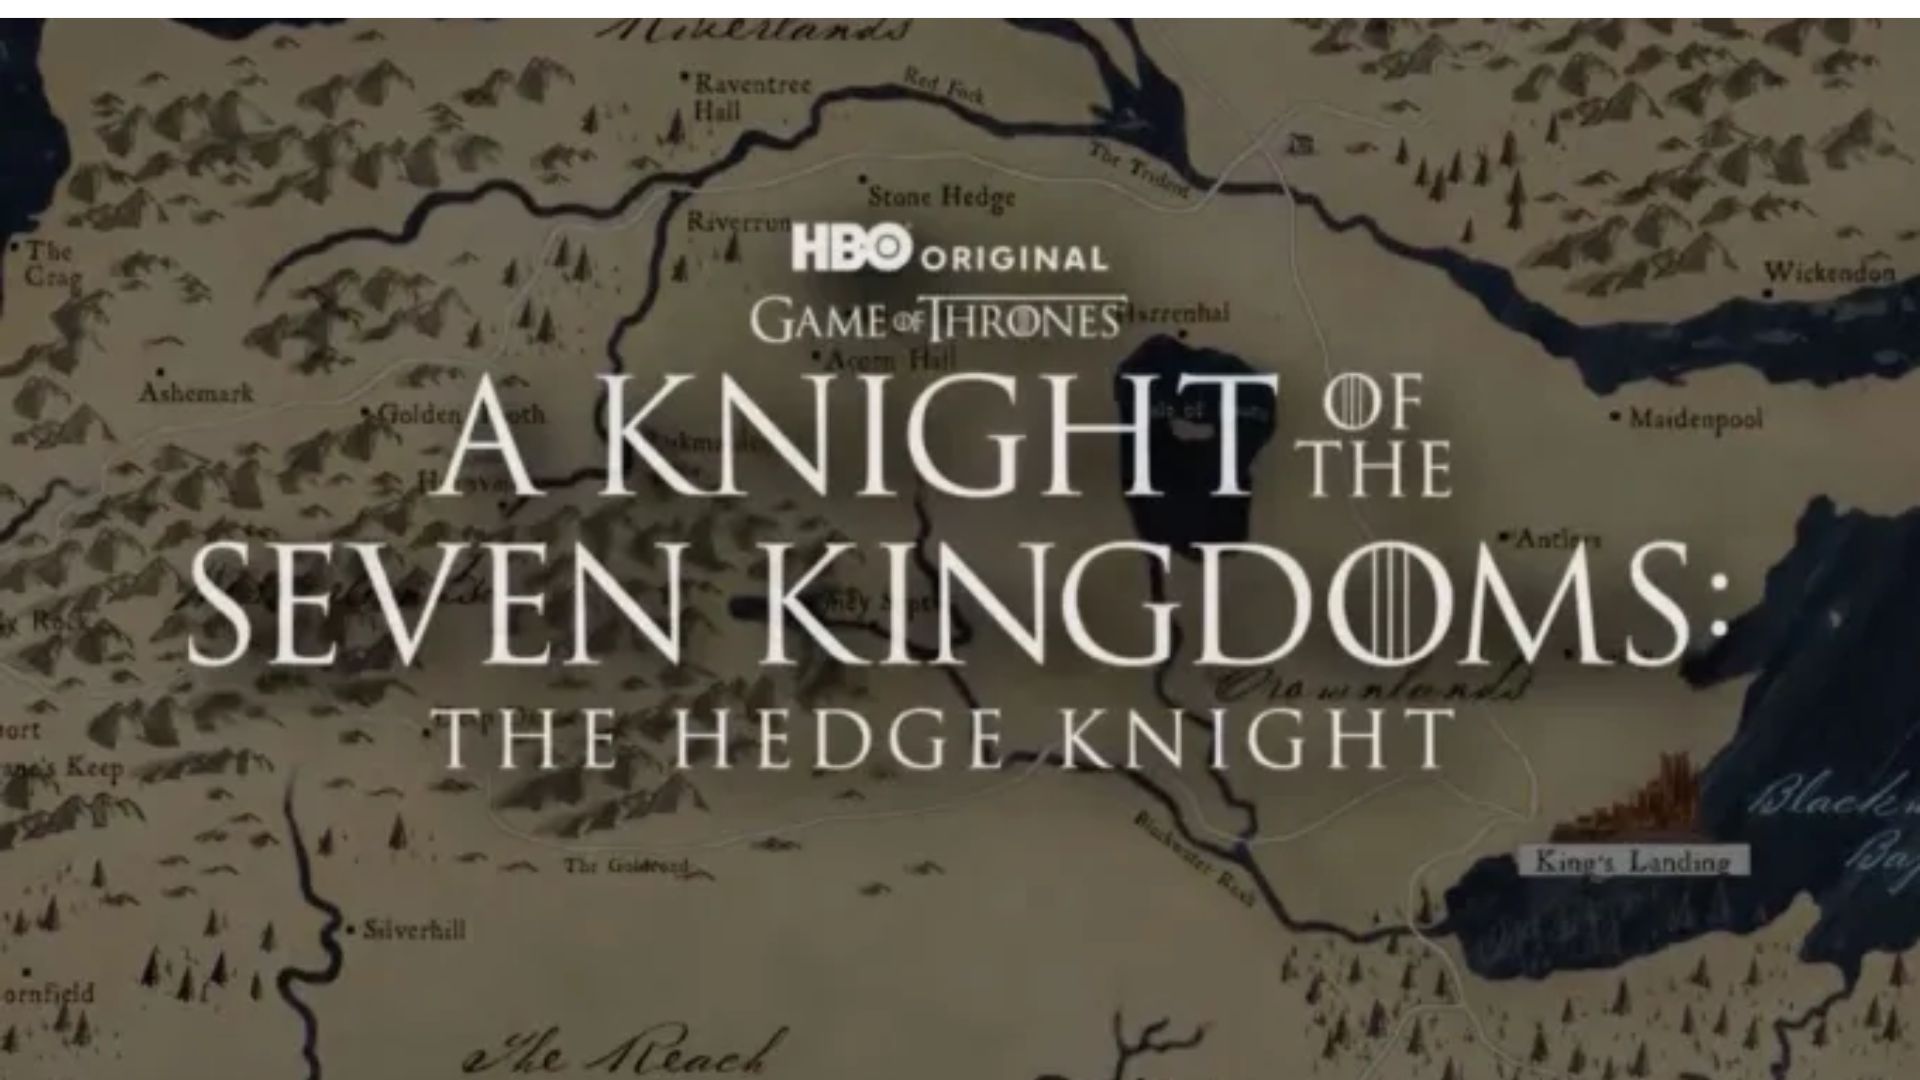 ‘Game of Thrones’ spinoff ‘The Hedge Knight’ release date announced